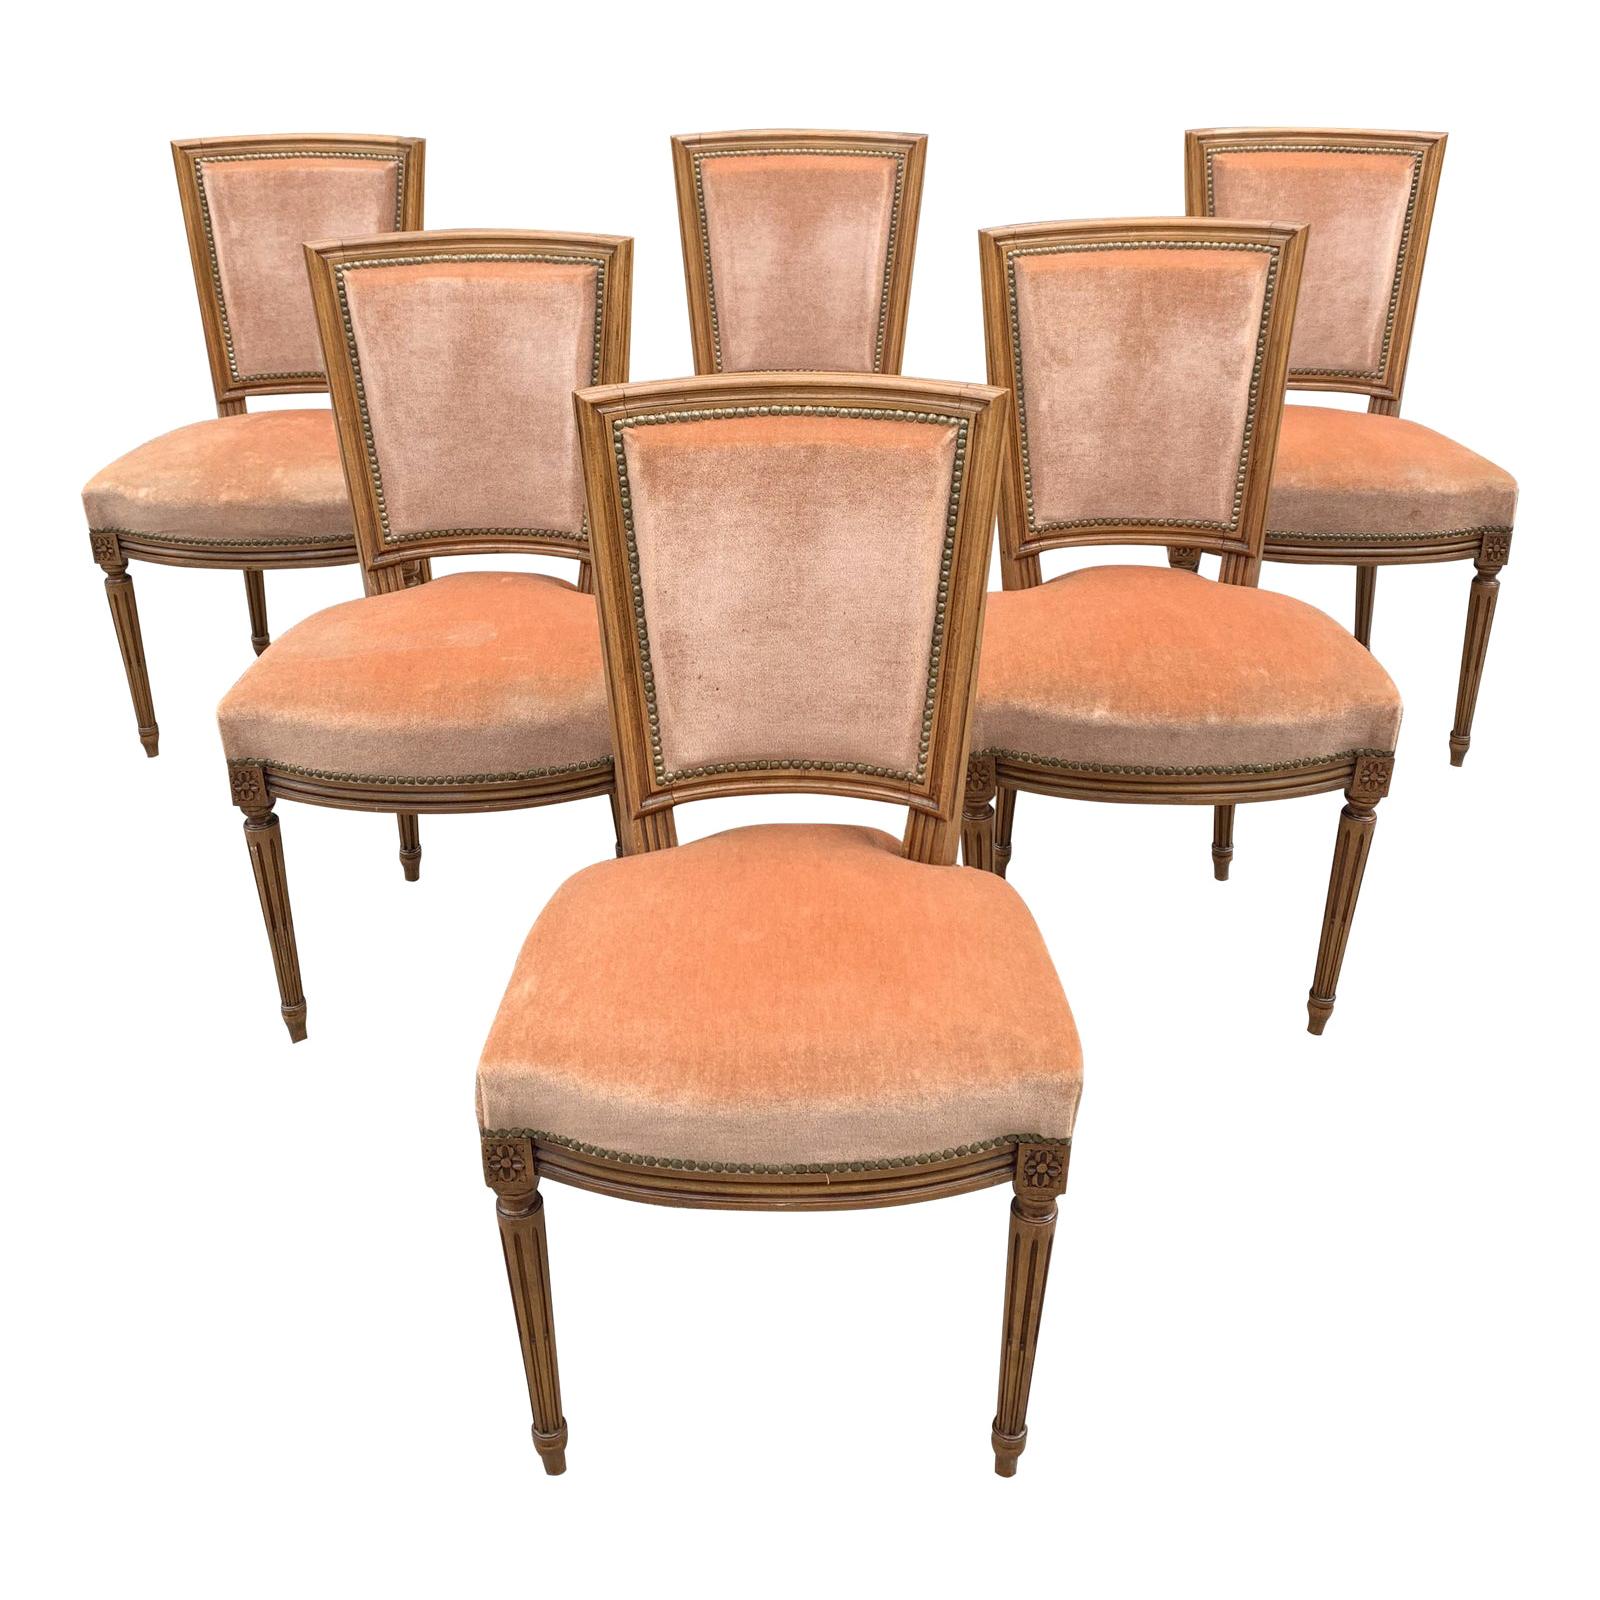 Set of 6 French Louis Xvl Solid Mahogany Dining Chairs, 1910s For Sale